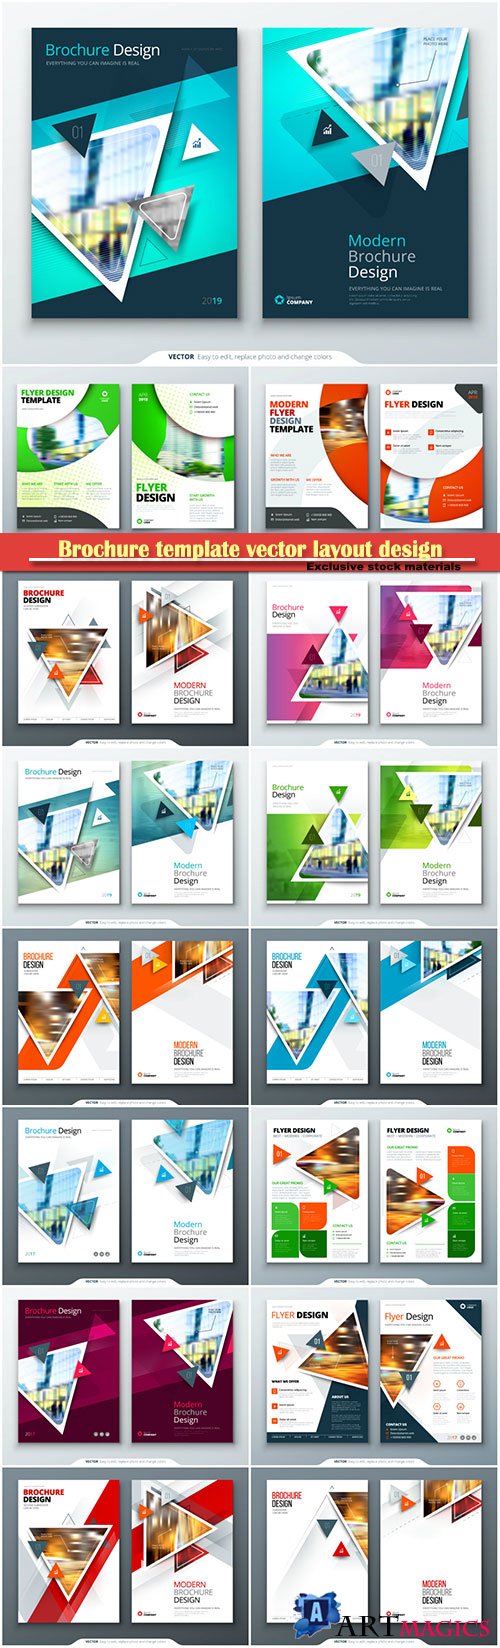 Brochure template vector layout design, corporate business annual report, magazine, flyer mockup